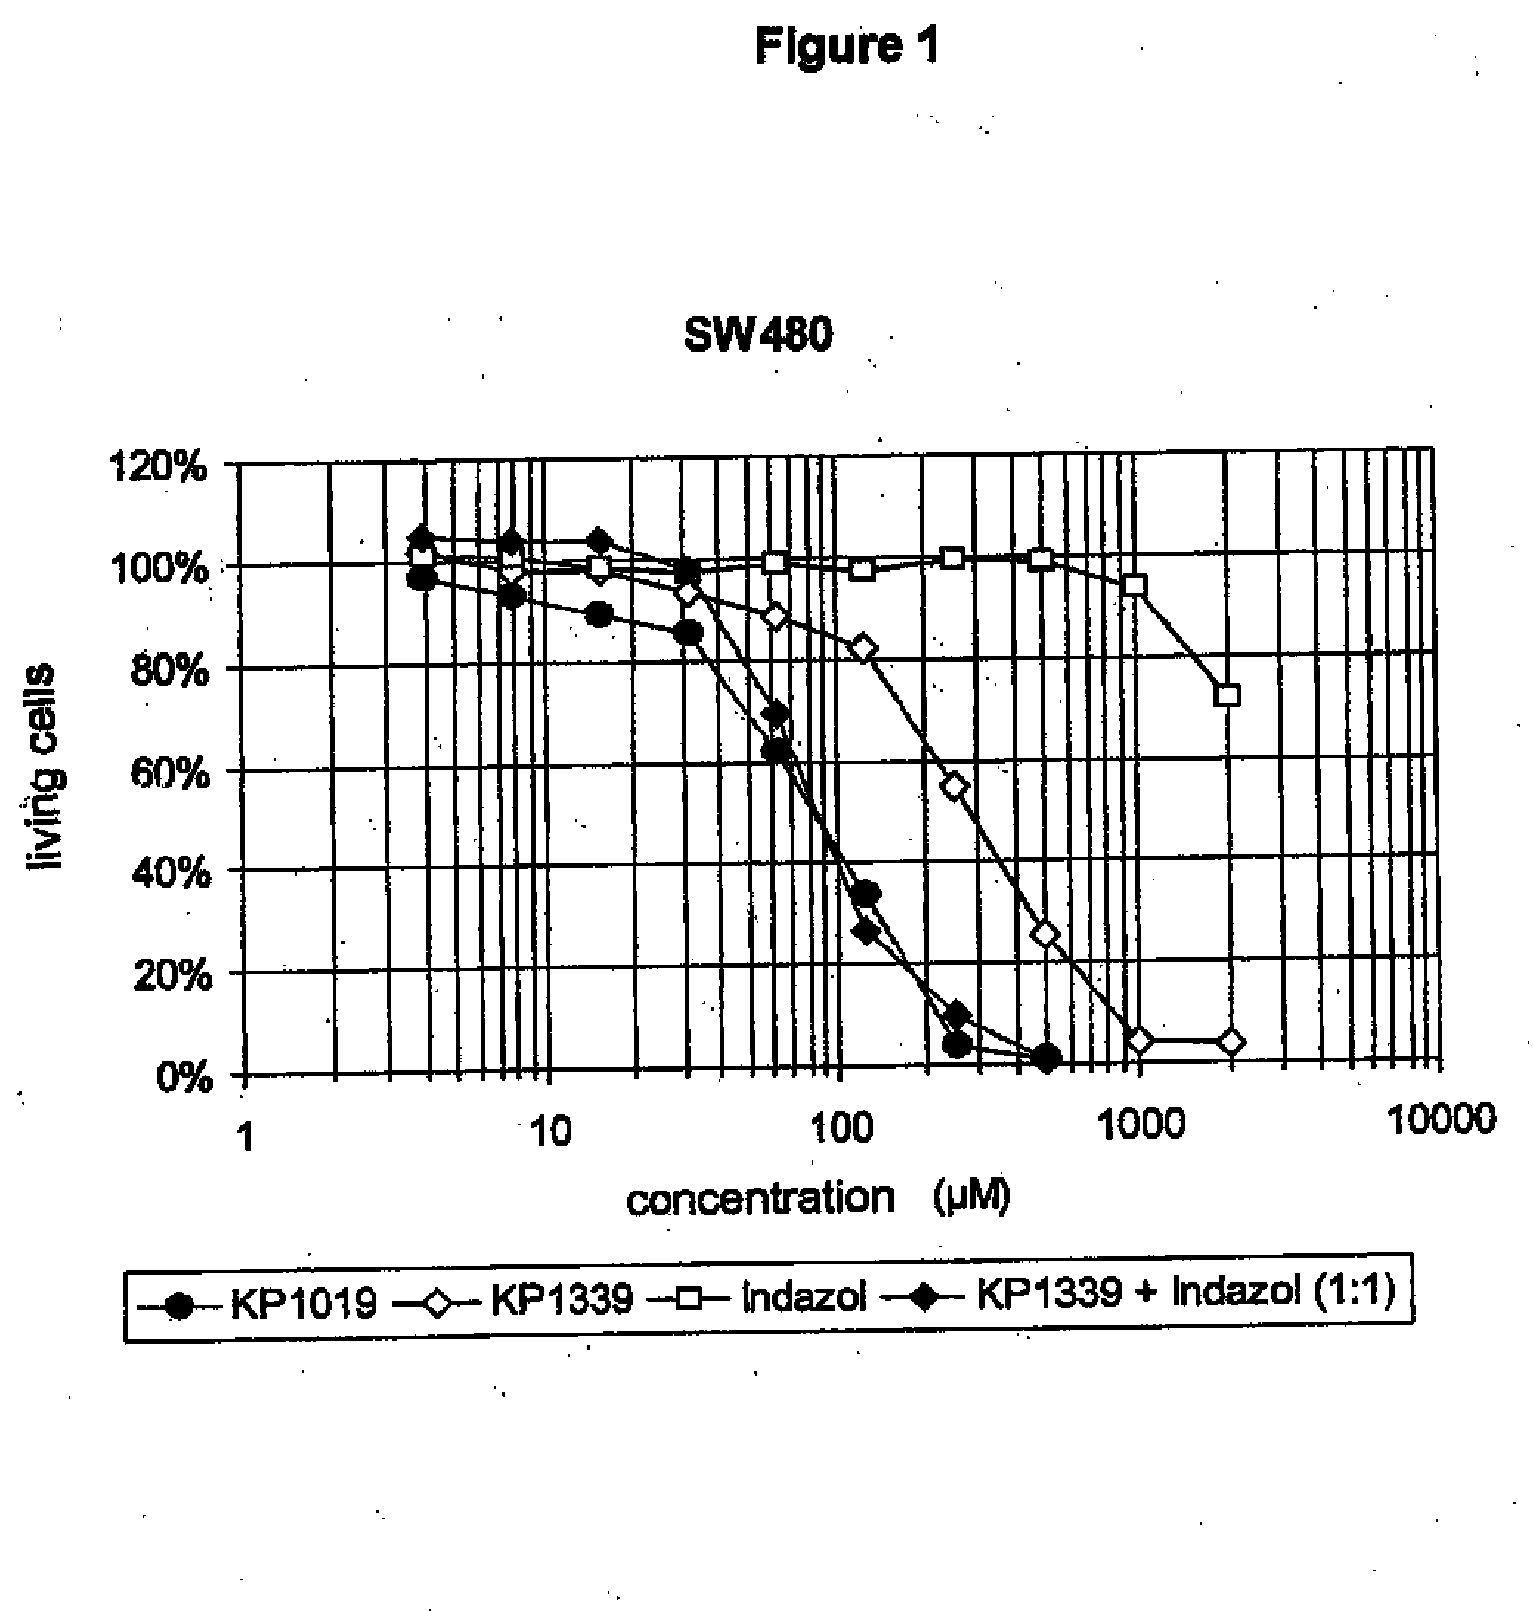 Anticancer compositions, and methods of making and using the same